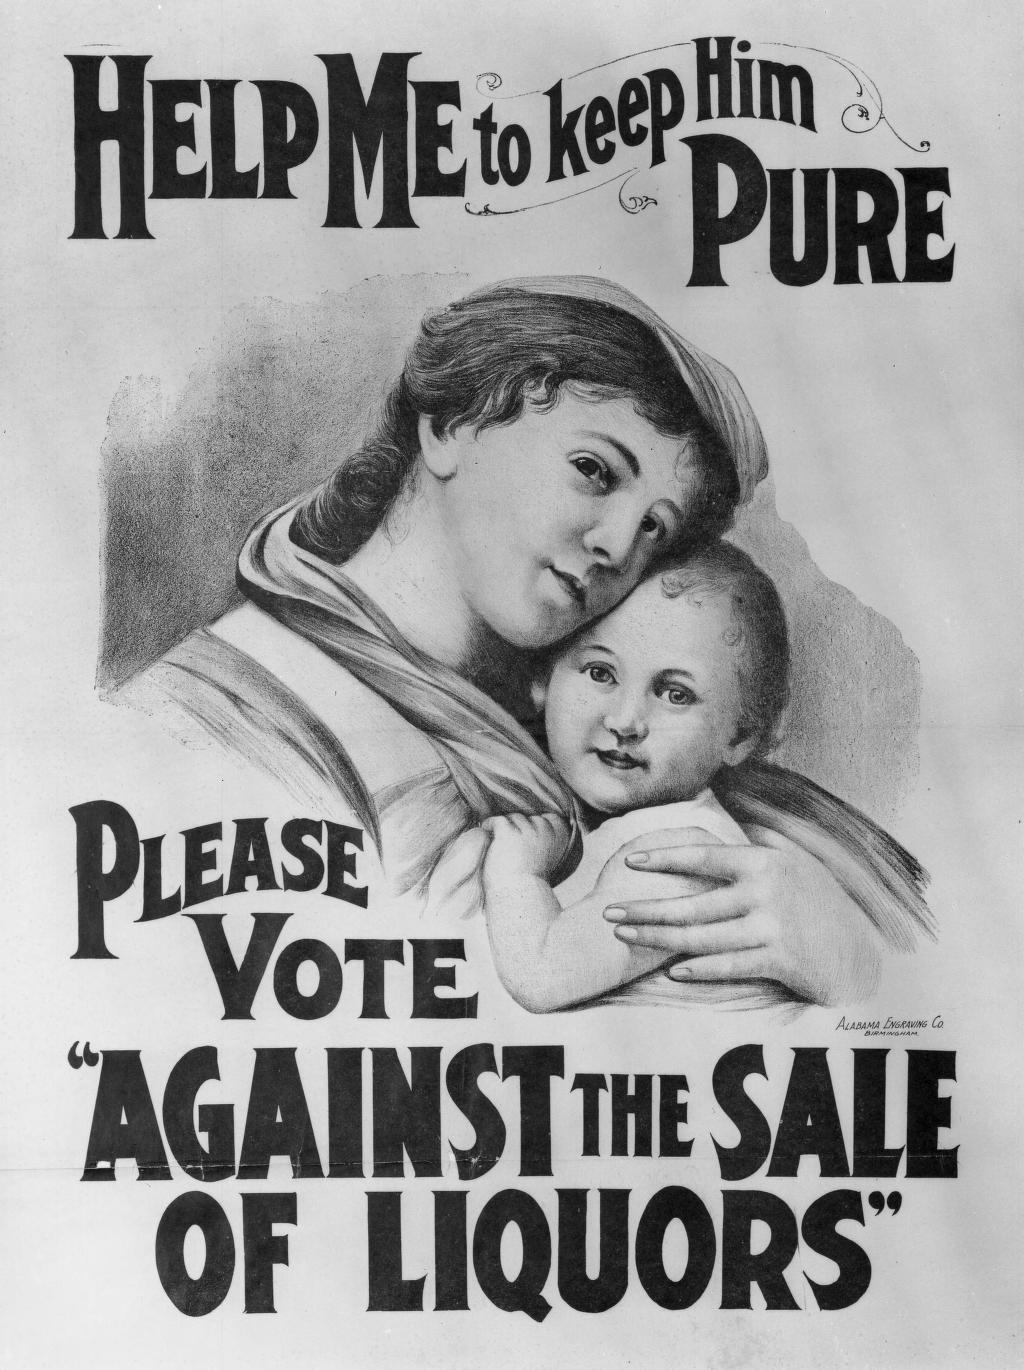 Poster of a mother holding an infant with text that says, "Help me to keep him Pure. Please vote 'against the sale of liquors'."